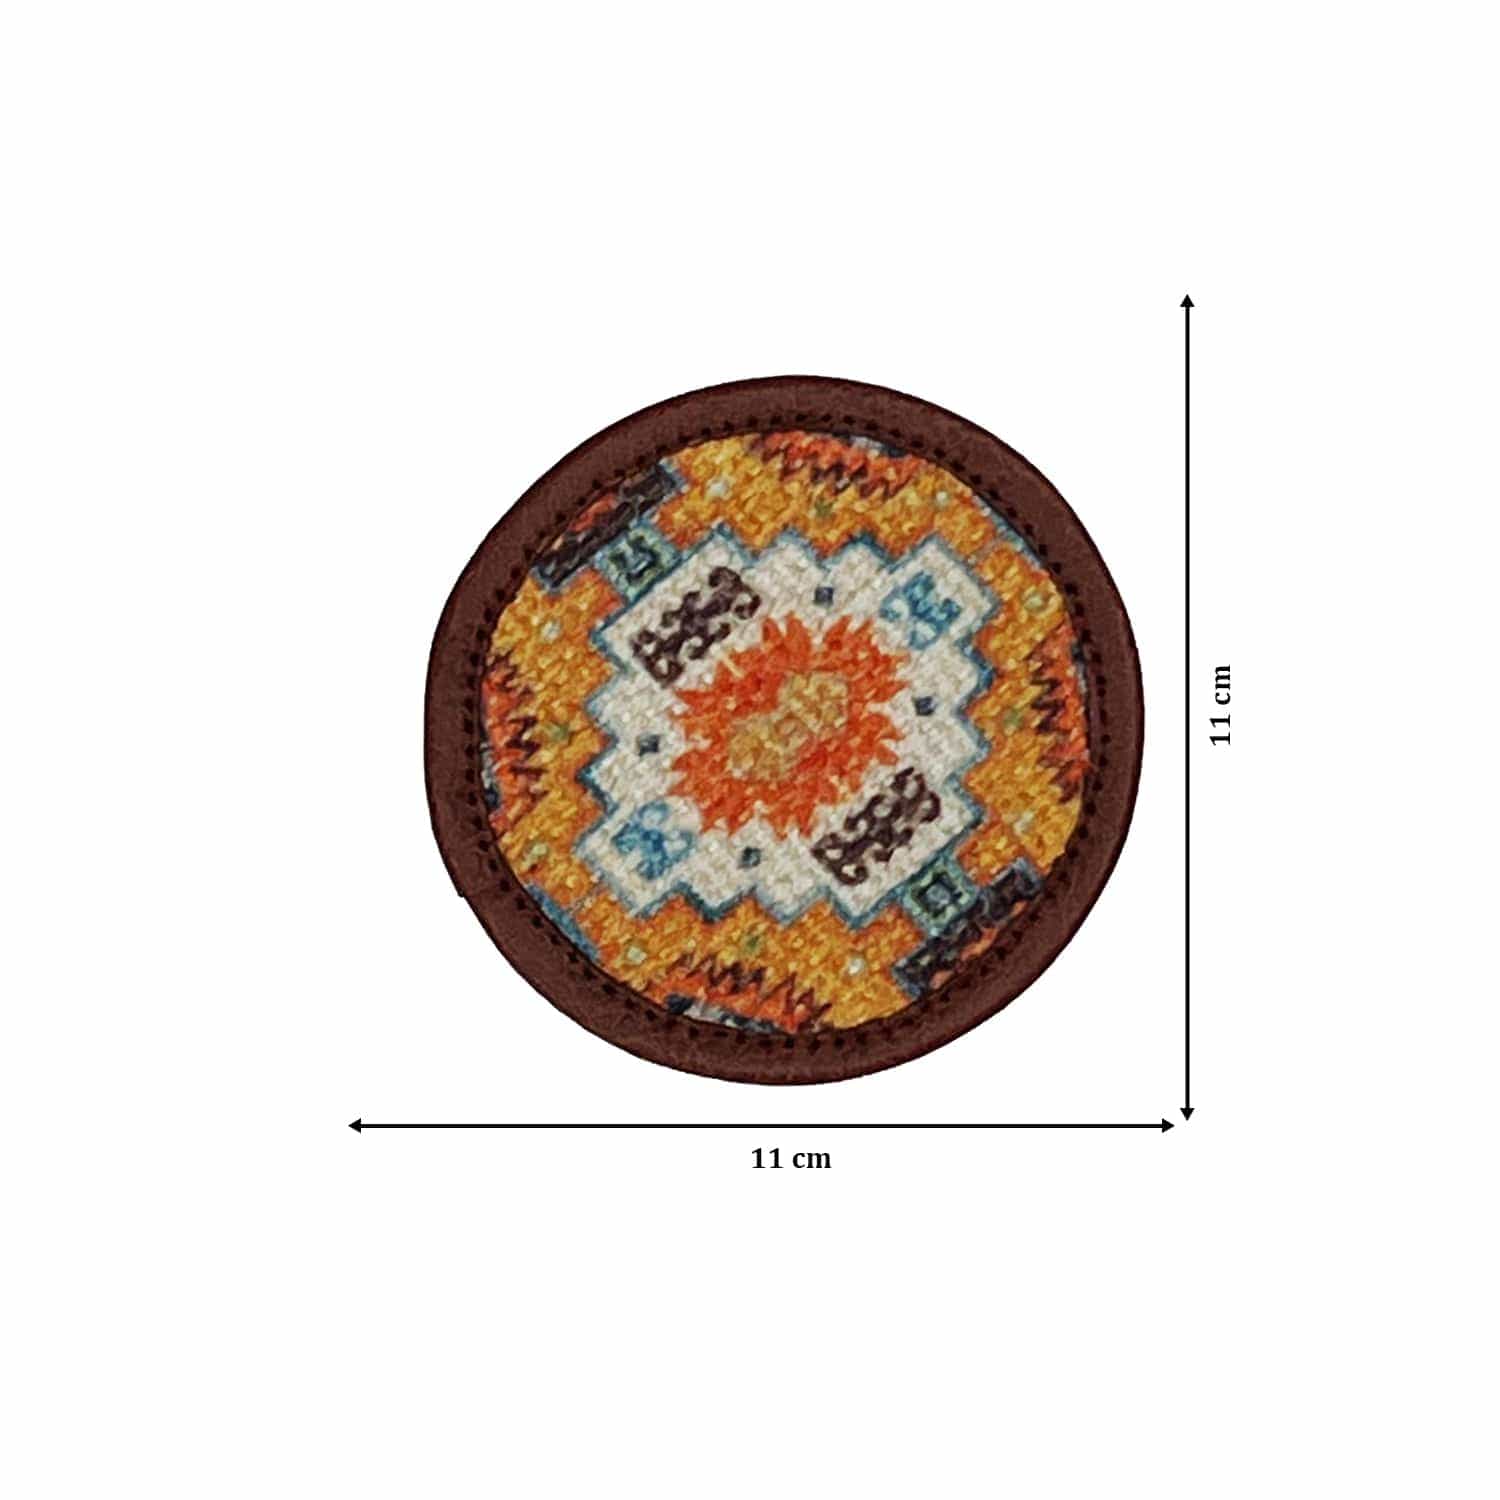 Mona-B Coaster Mona B Set of 4 Printed Coasters, 4.5 INCH Round, Best for Bed-Side Table/Center Table, Dining Table - PC-116